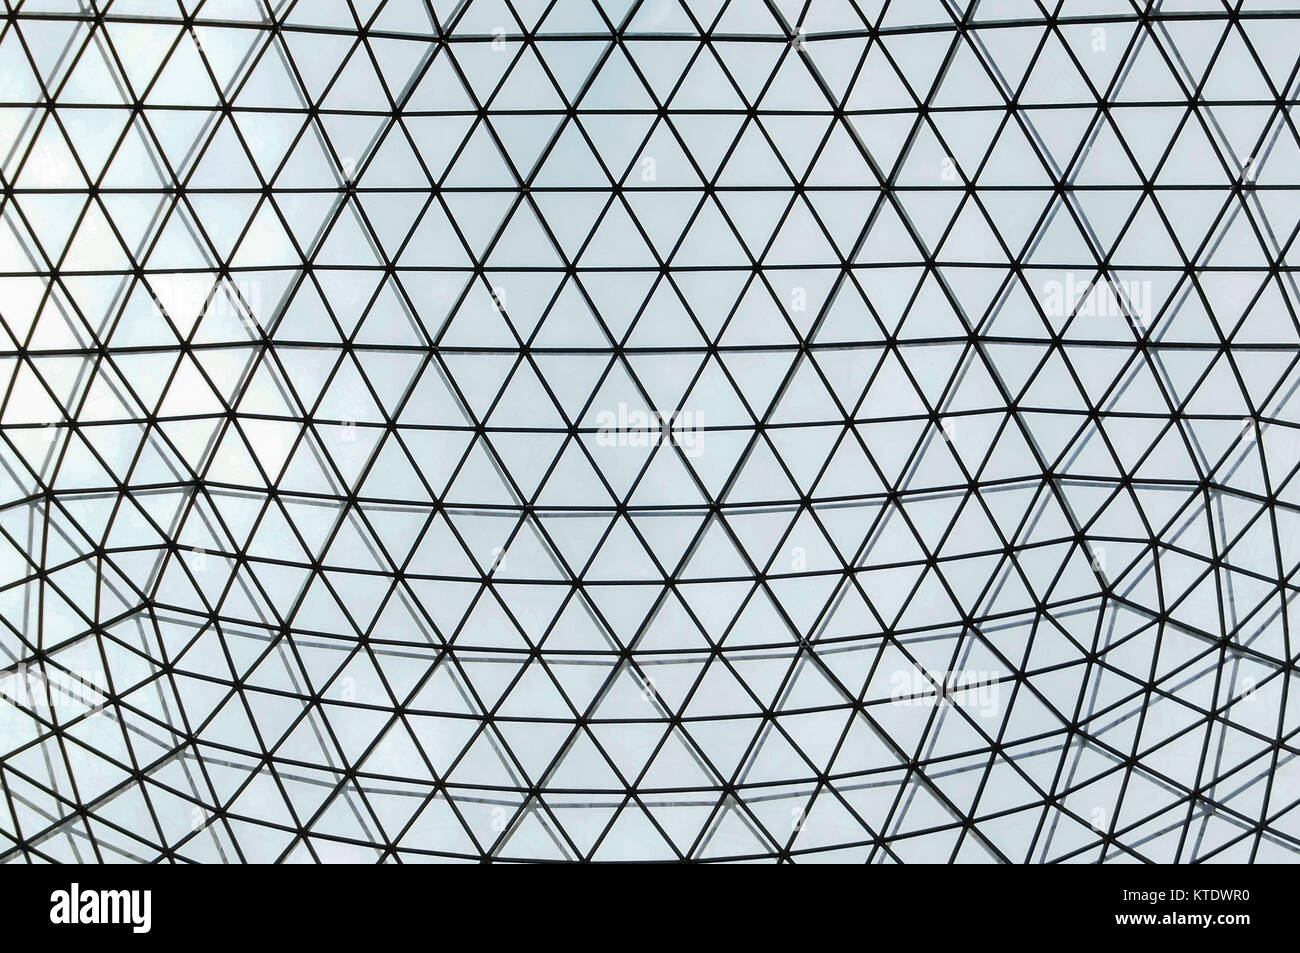 metal and glass atrium roof in repeating symmetrical triangualar pattern, shown with light coming through Stock Photo